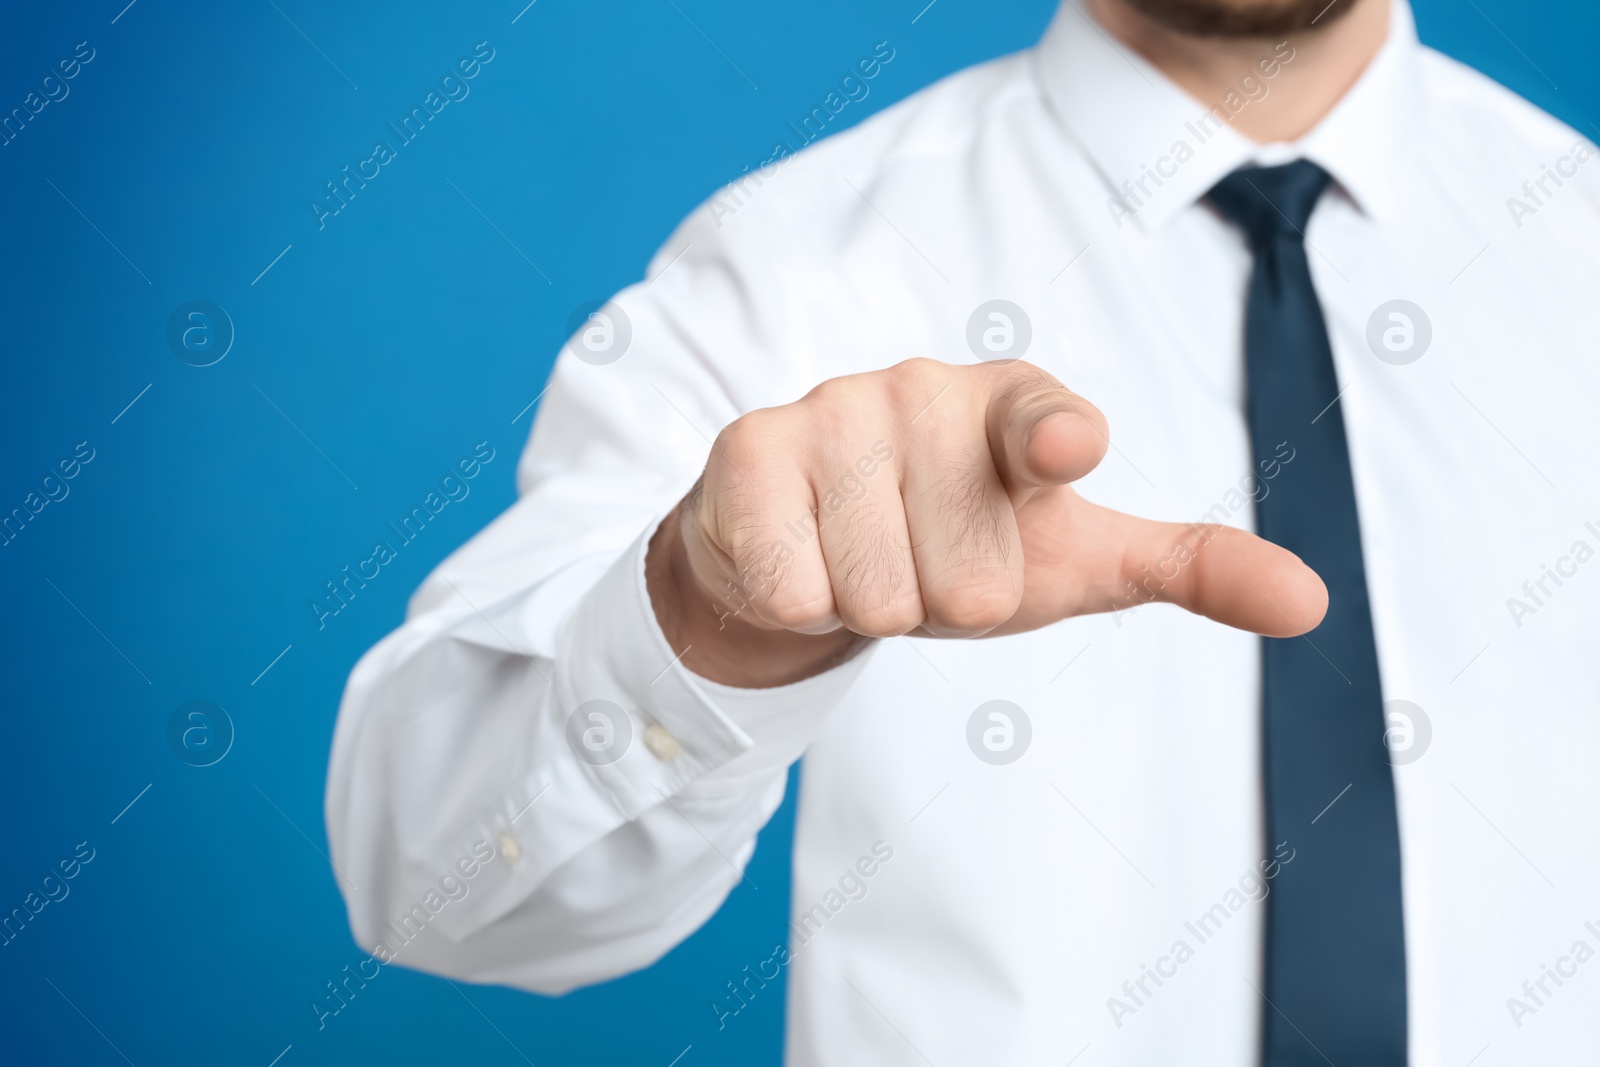 Photo of Businessman touching something against light blue background, focus on hand